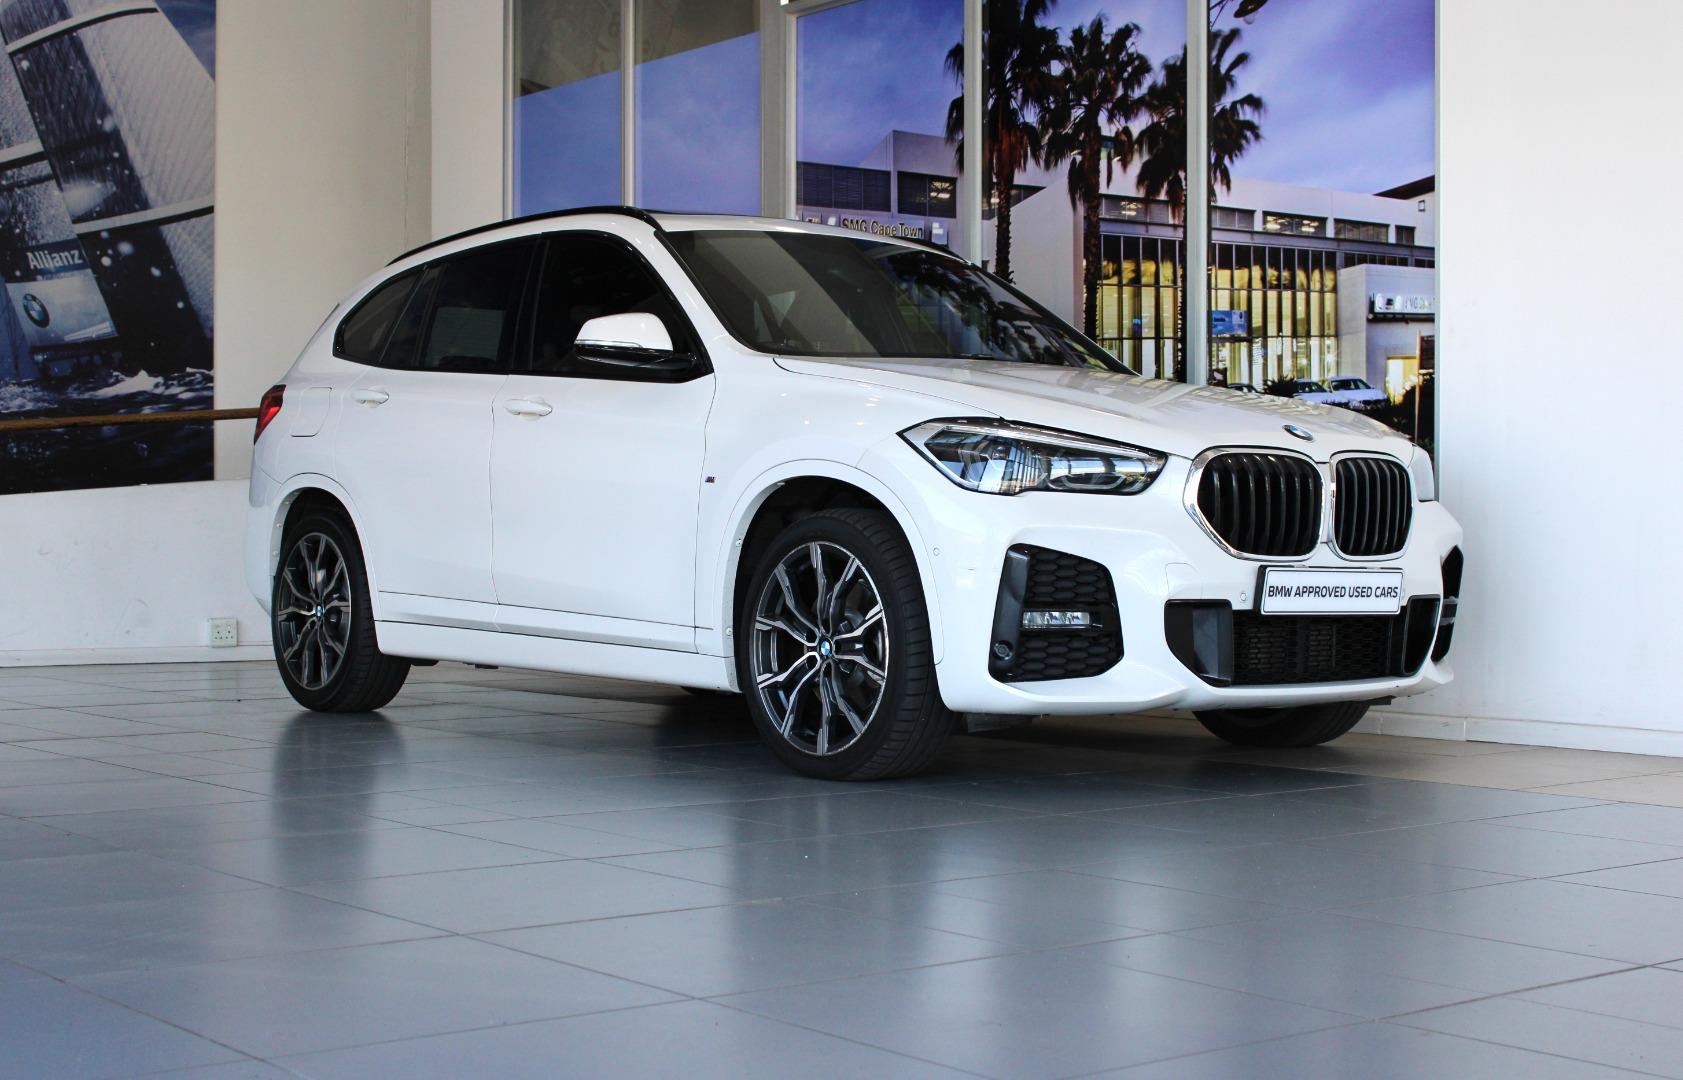 2021 BMW X1 sDRIVE20d M SPORT AT (F48)  for sale - SMG12|USED|115336